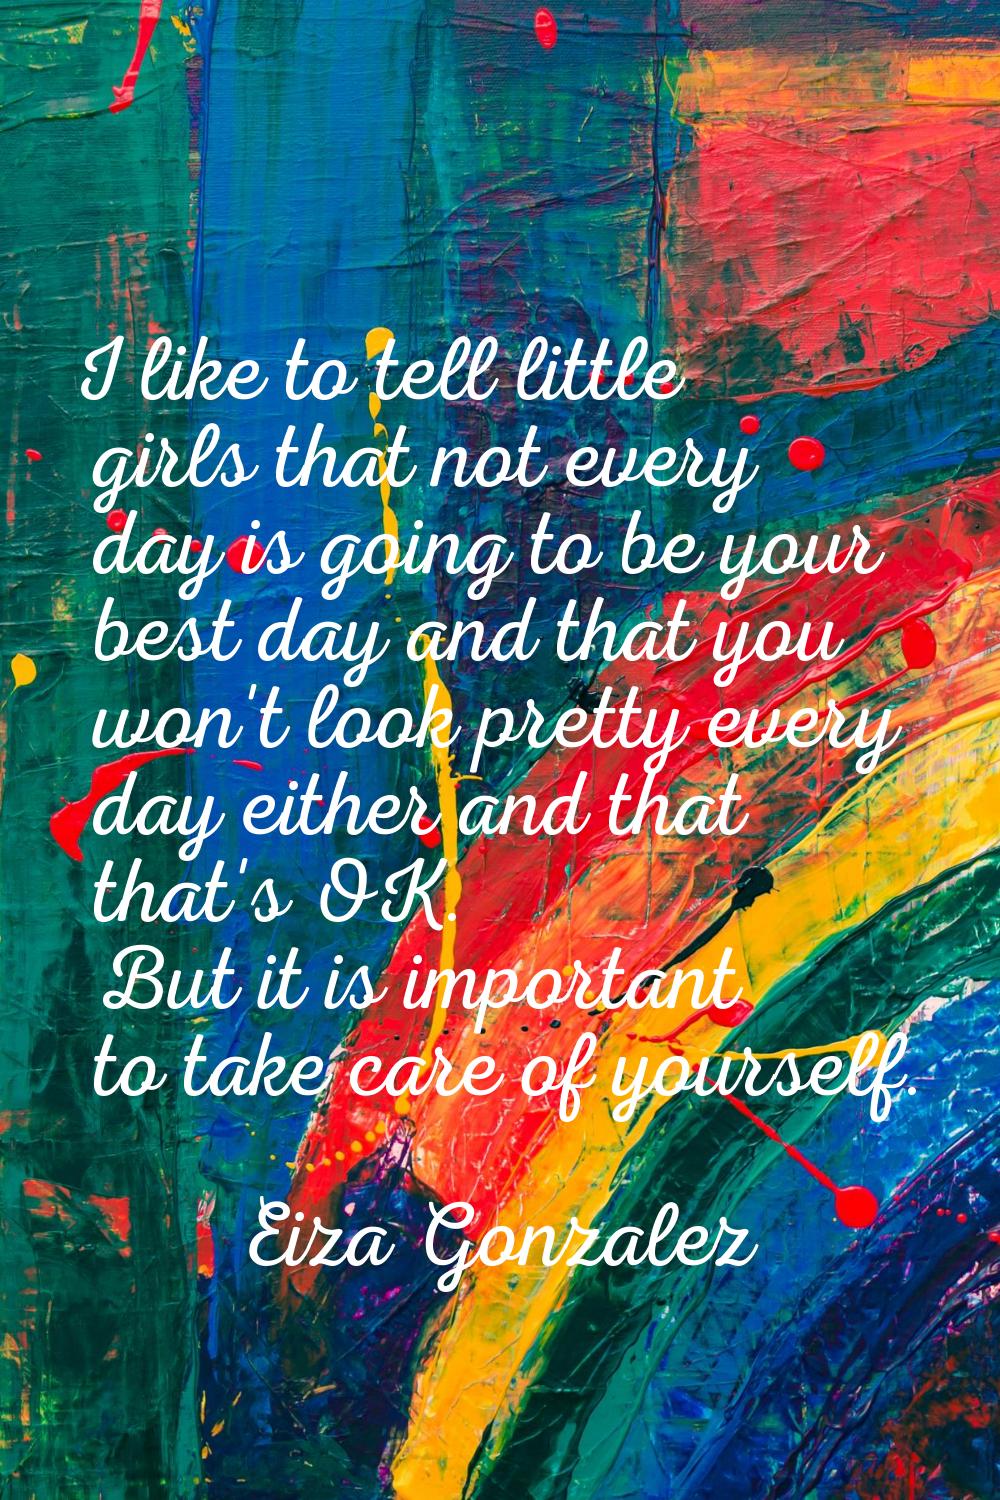 I like to tell little girls that not every day is going to be your best day and that you won't look